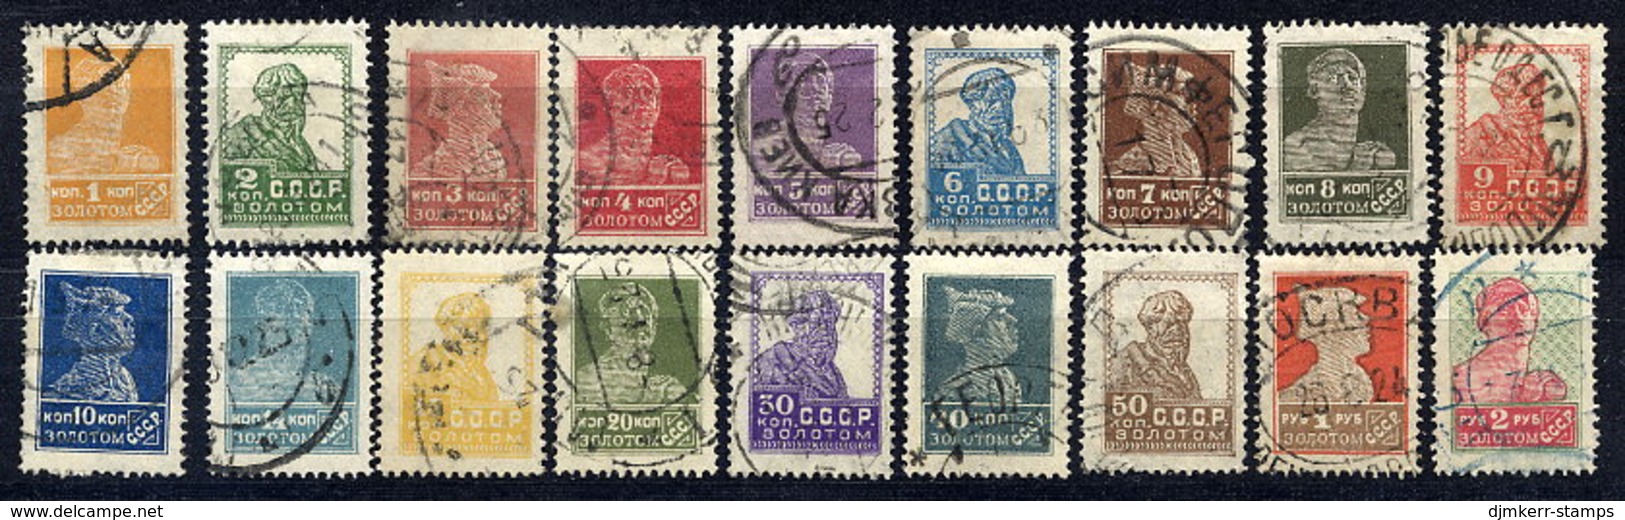 SOVIET UNION 1924-25 Definitive Complete To 2 R. Without Watermark Perforated 14½:14¾, Used.  Michel 242 I A - 259 I A. - Gebruikt